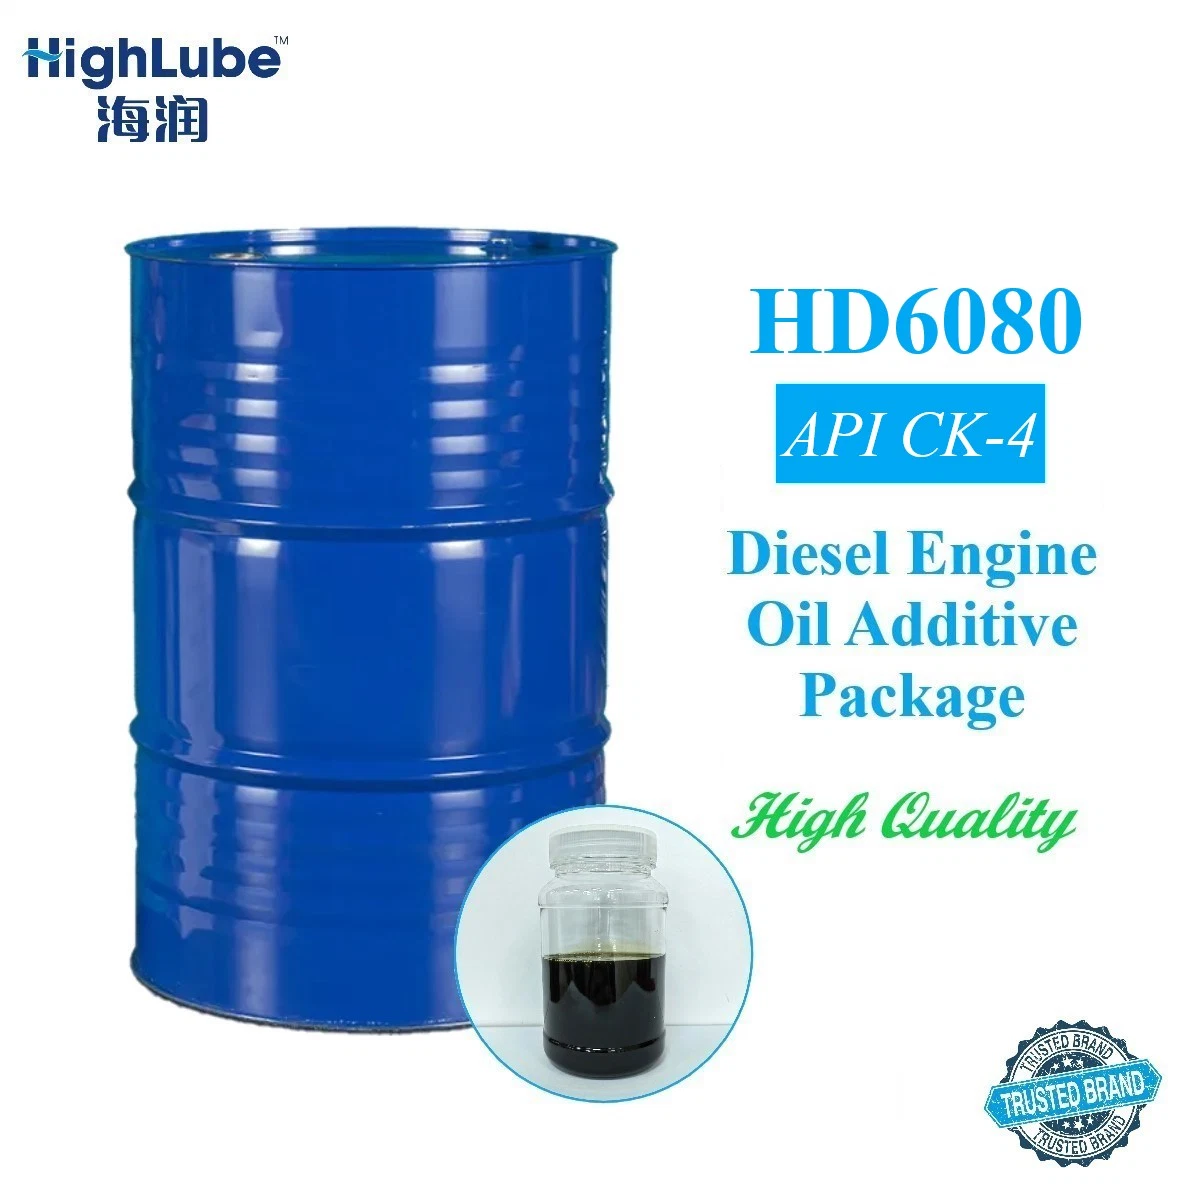 Diesel Engine Oil Additive Package, API Ck-4 Lubricant Additive